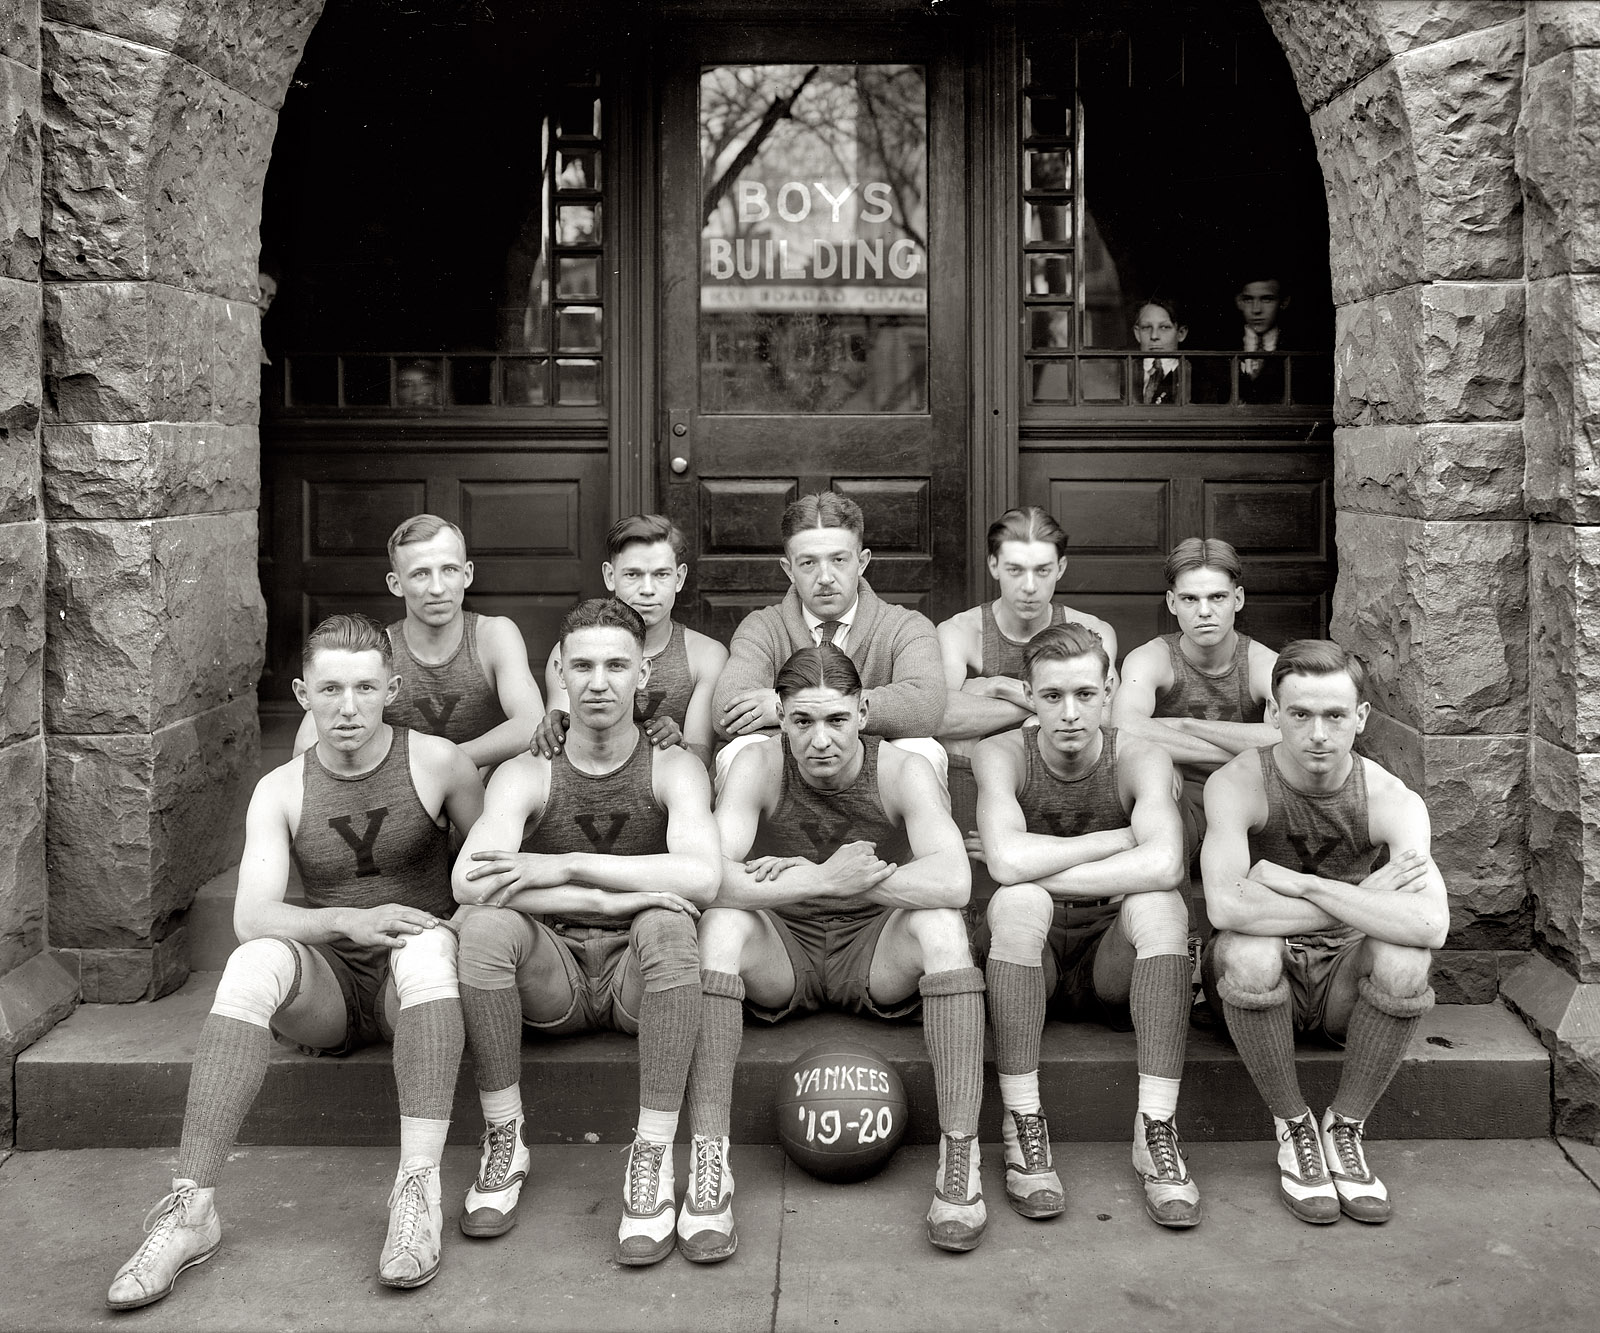 Washington, D.C. "Y.M.C.A. Yankees basketball team, 1920." View full size. National Photo Company Collection glass negative, Library of Congress.